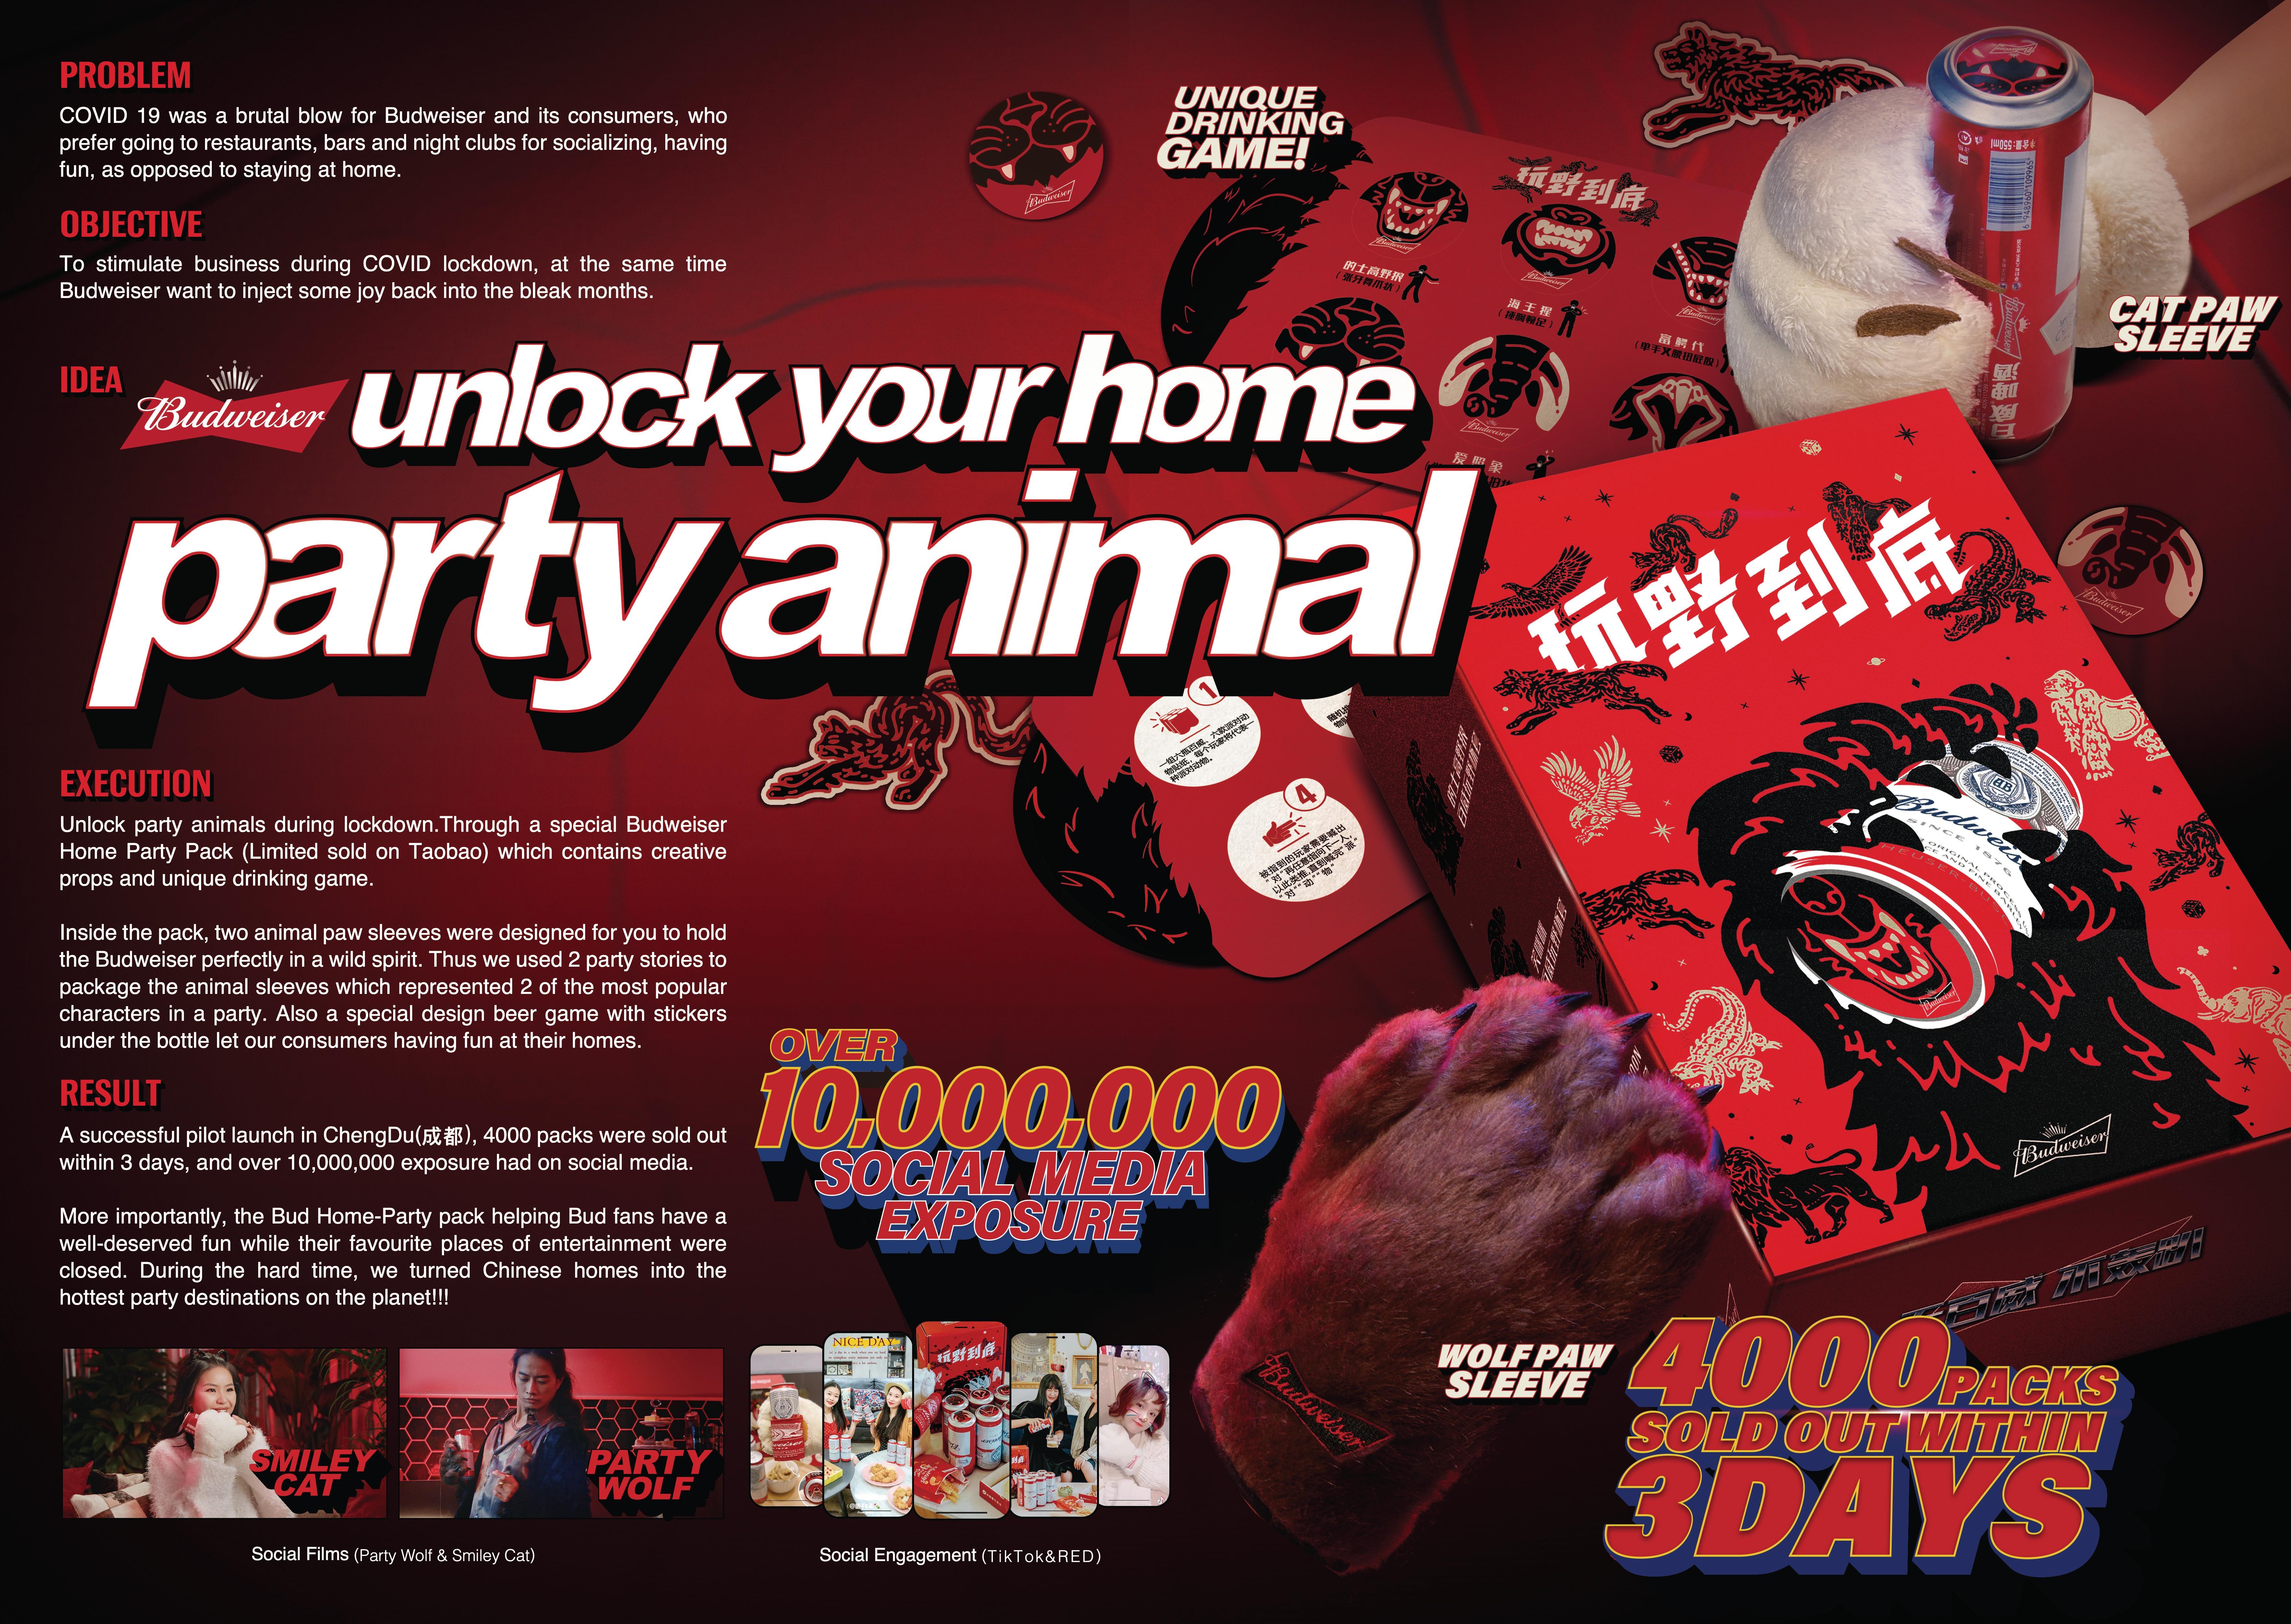 UNLOCK YOUR HOME PARTY ANIMAL